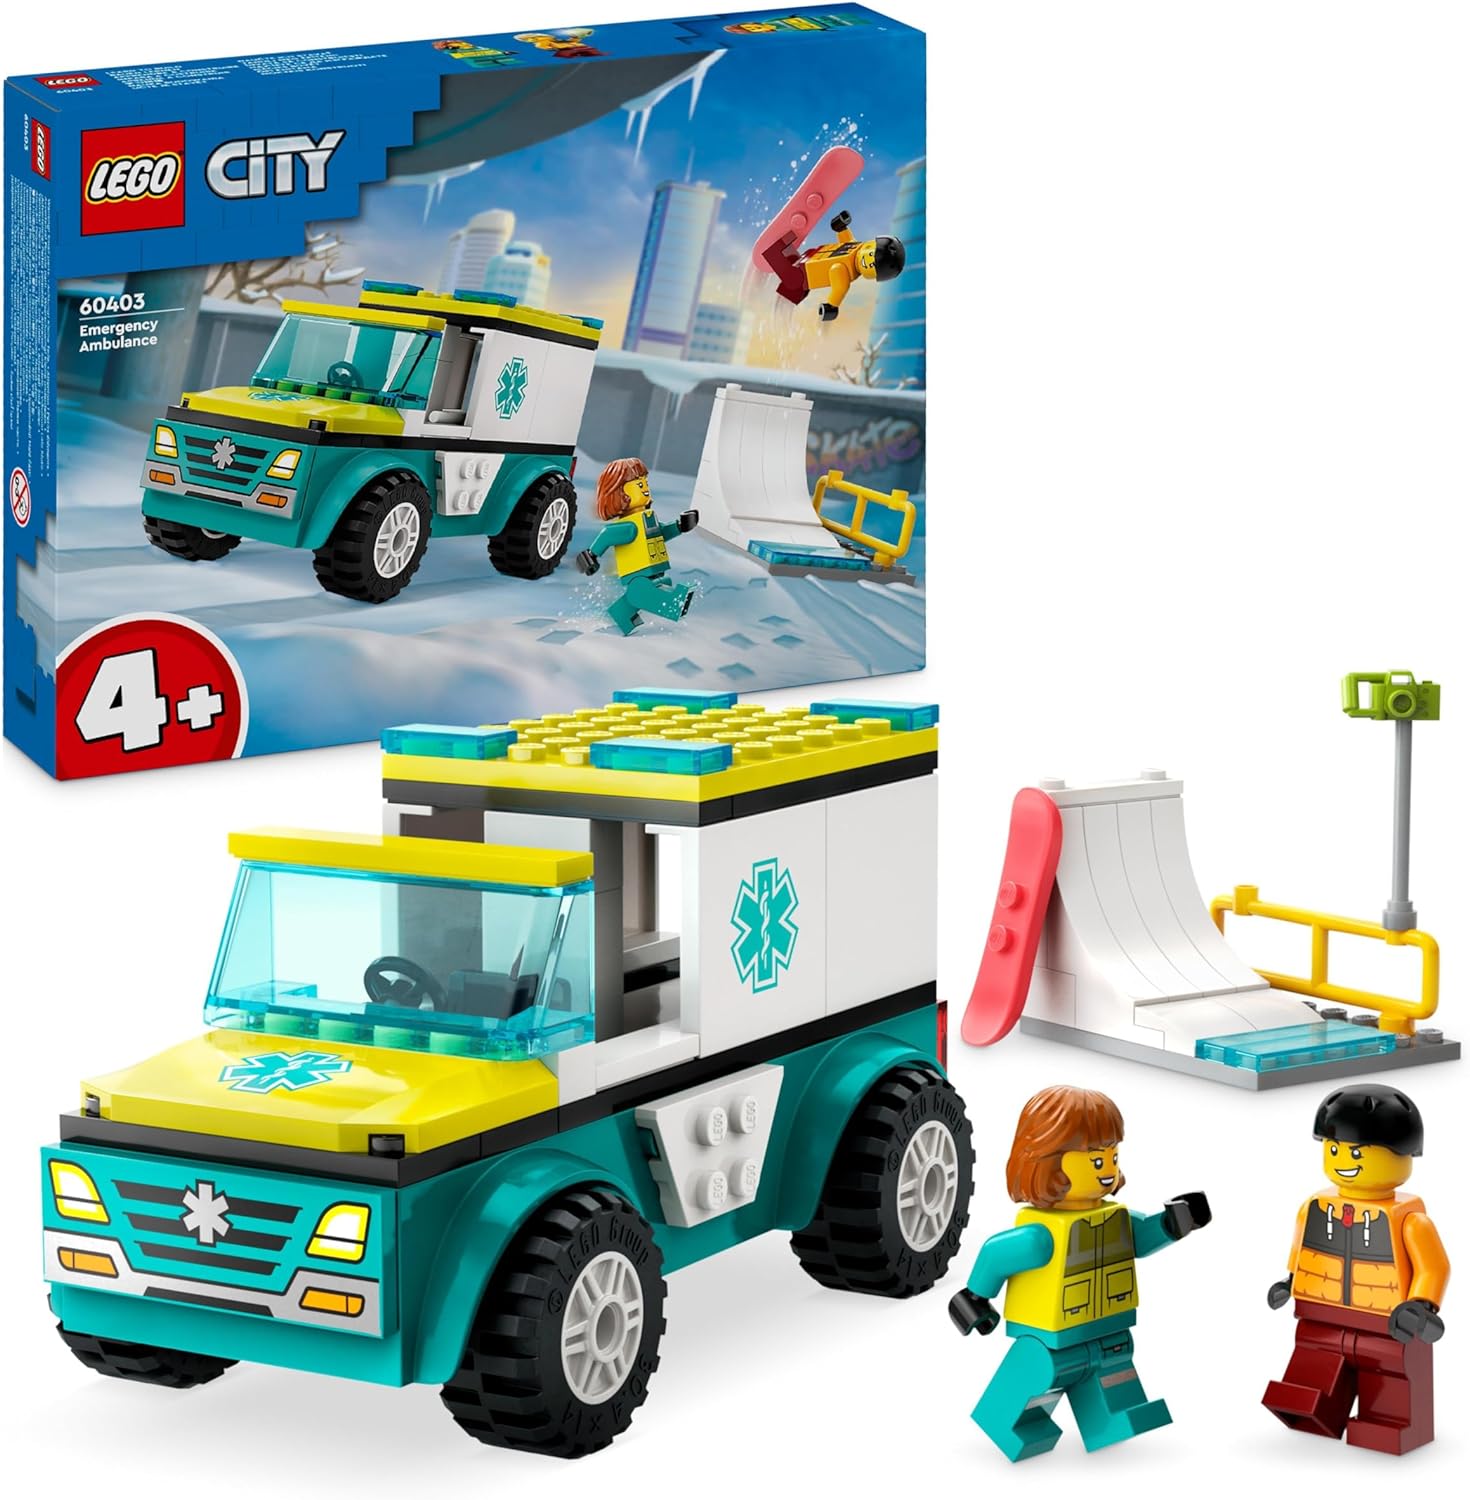 LEGO City ambulance and snowboarder, ambulance playset with toy car and 2 mini figures, snowboarder and paramedic figure, imaginative gift for boys and girls from 4 years, 60403